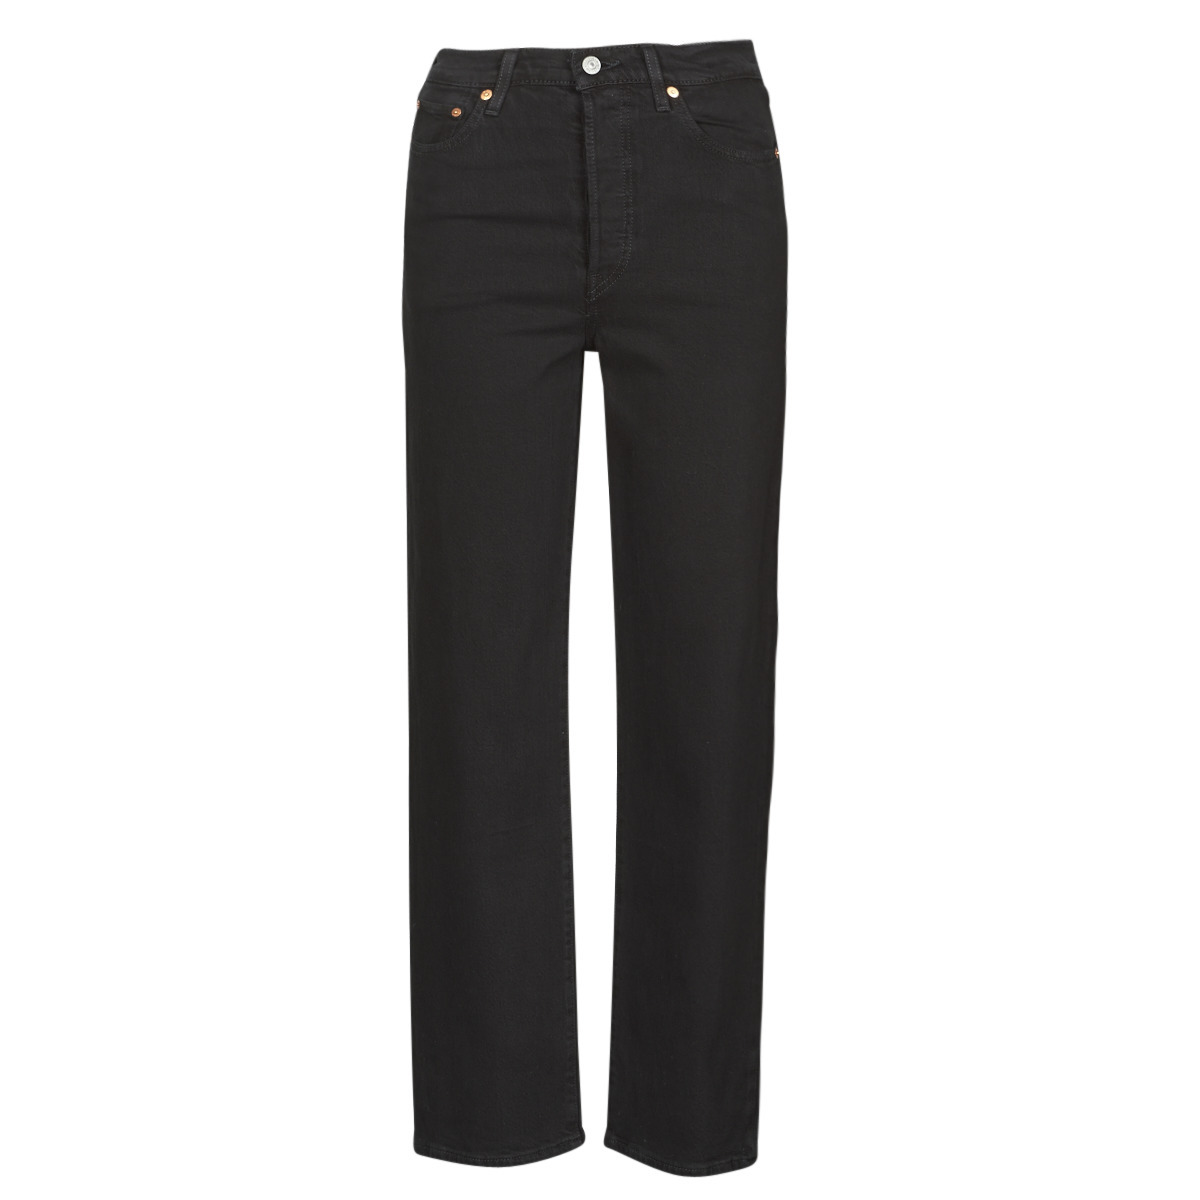 Spartoo Lady Black Jeans by Levi's GOOFASH